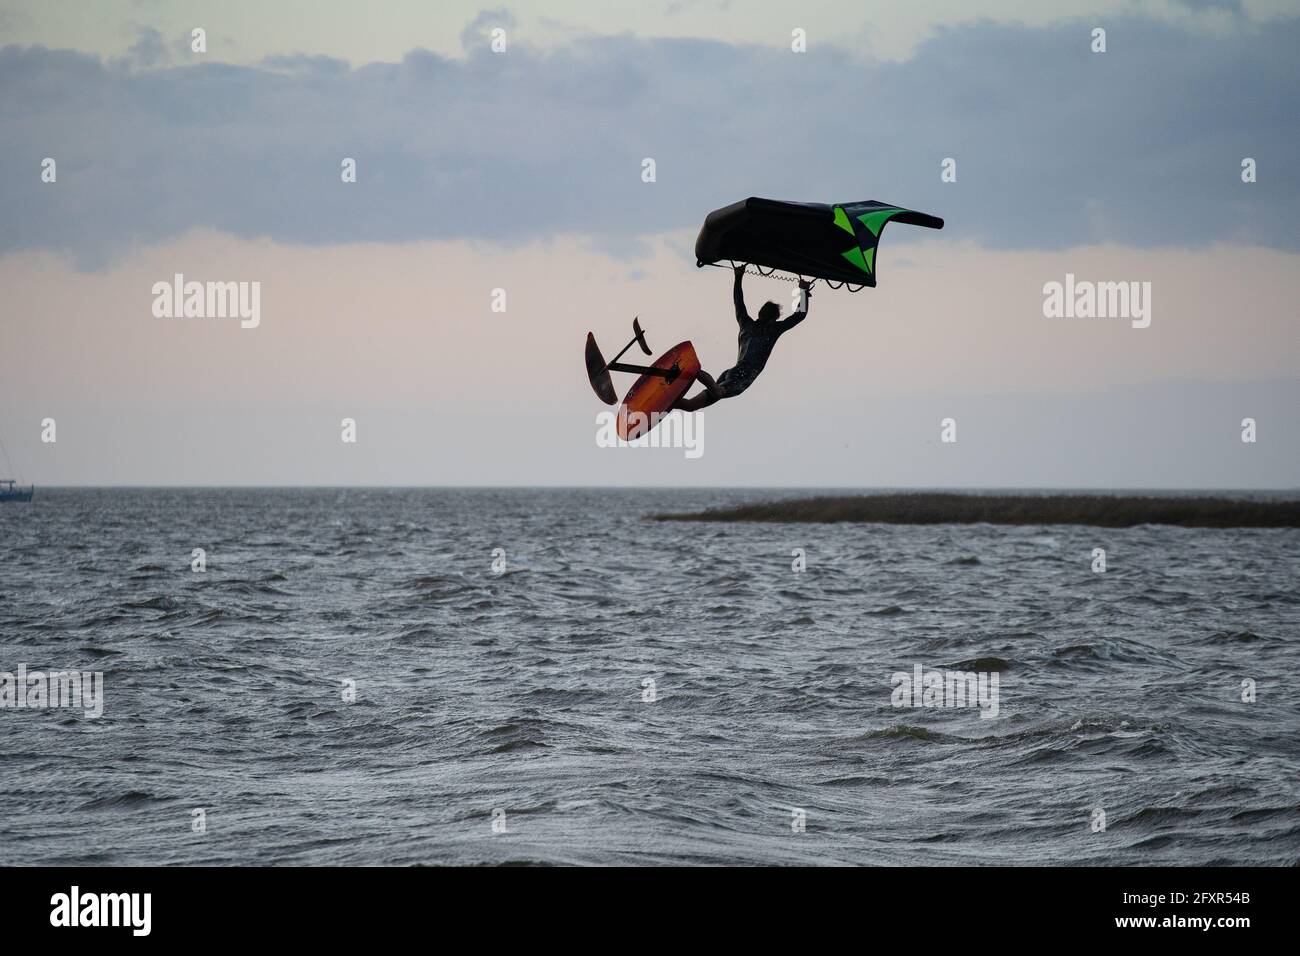 Pro surfer James Jenkins jumps his wing surfer over the Pamlico Sound at Nags Head, North Carolina, United States of America, North America Stock Photo